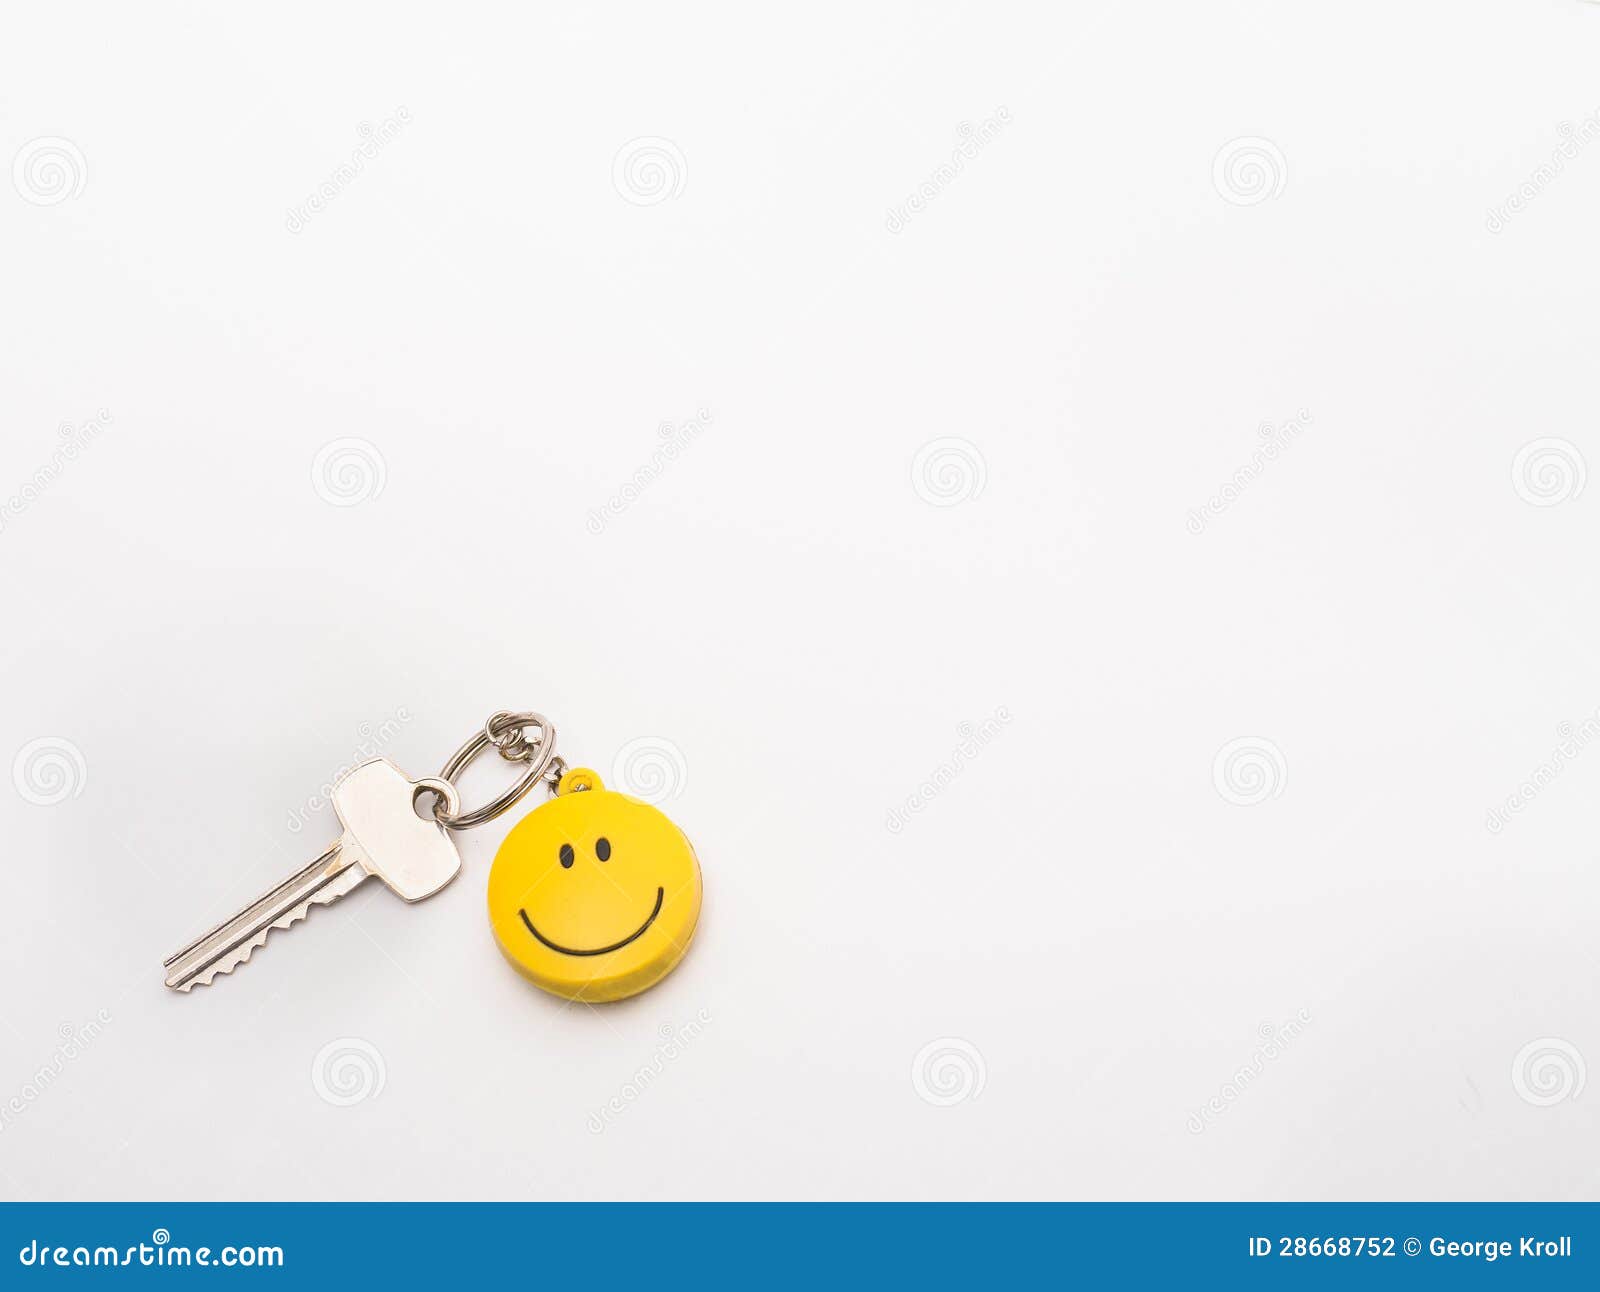 clipart smiley kys - photo #24